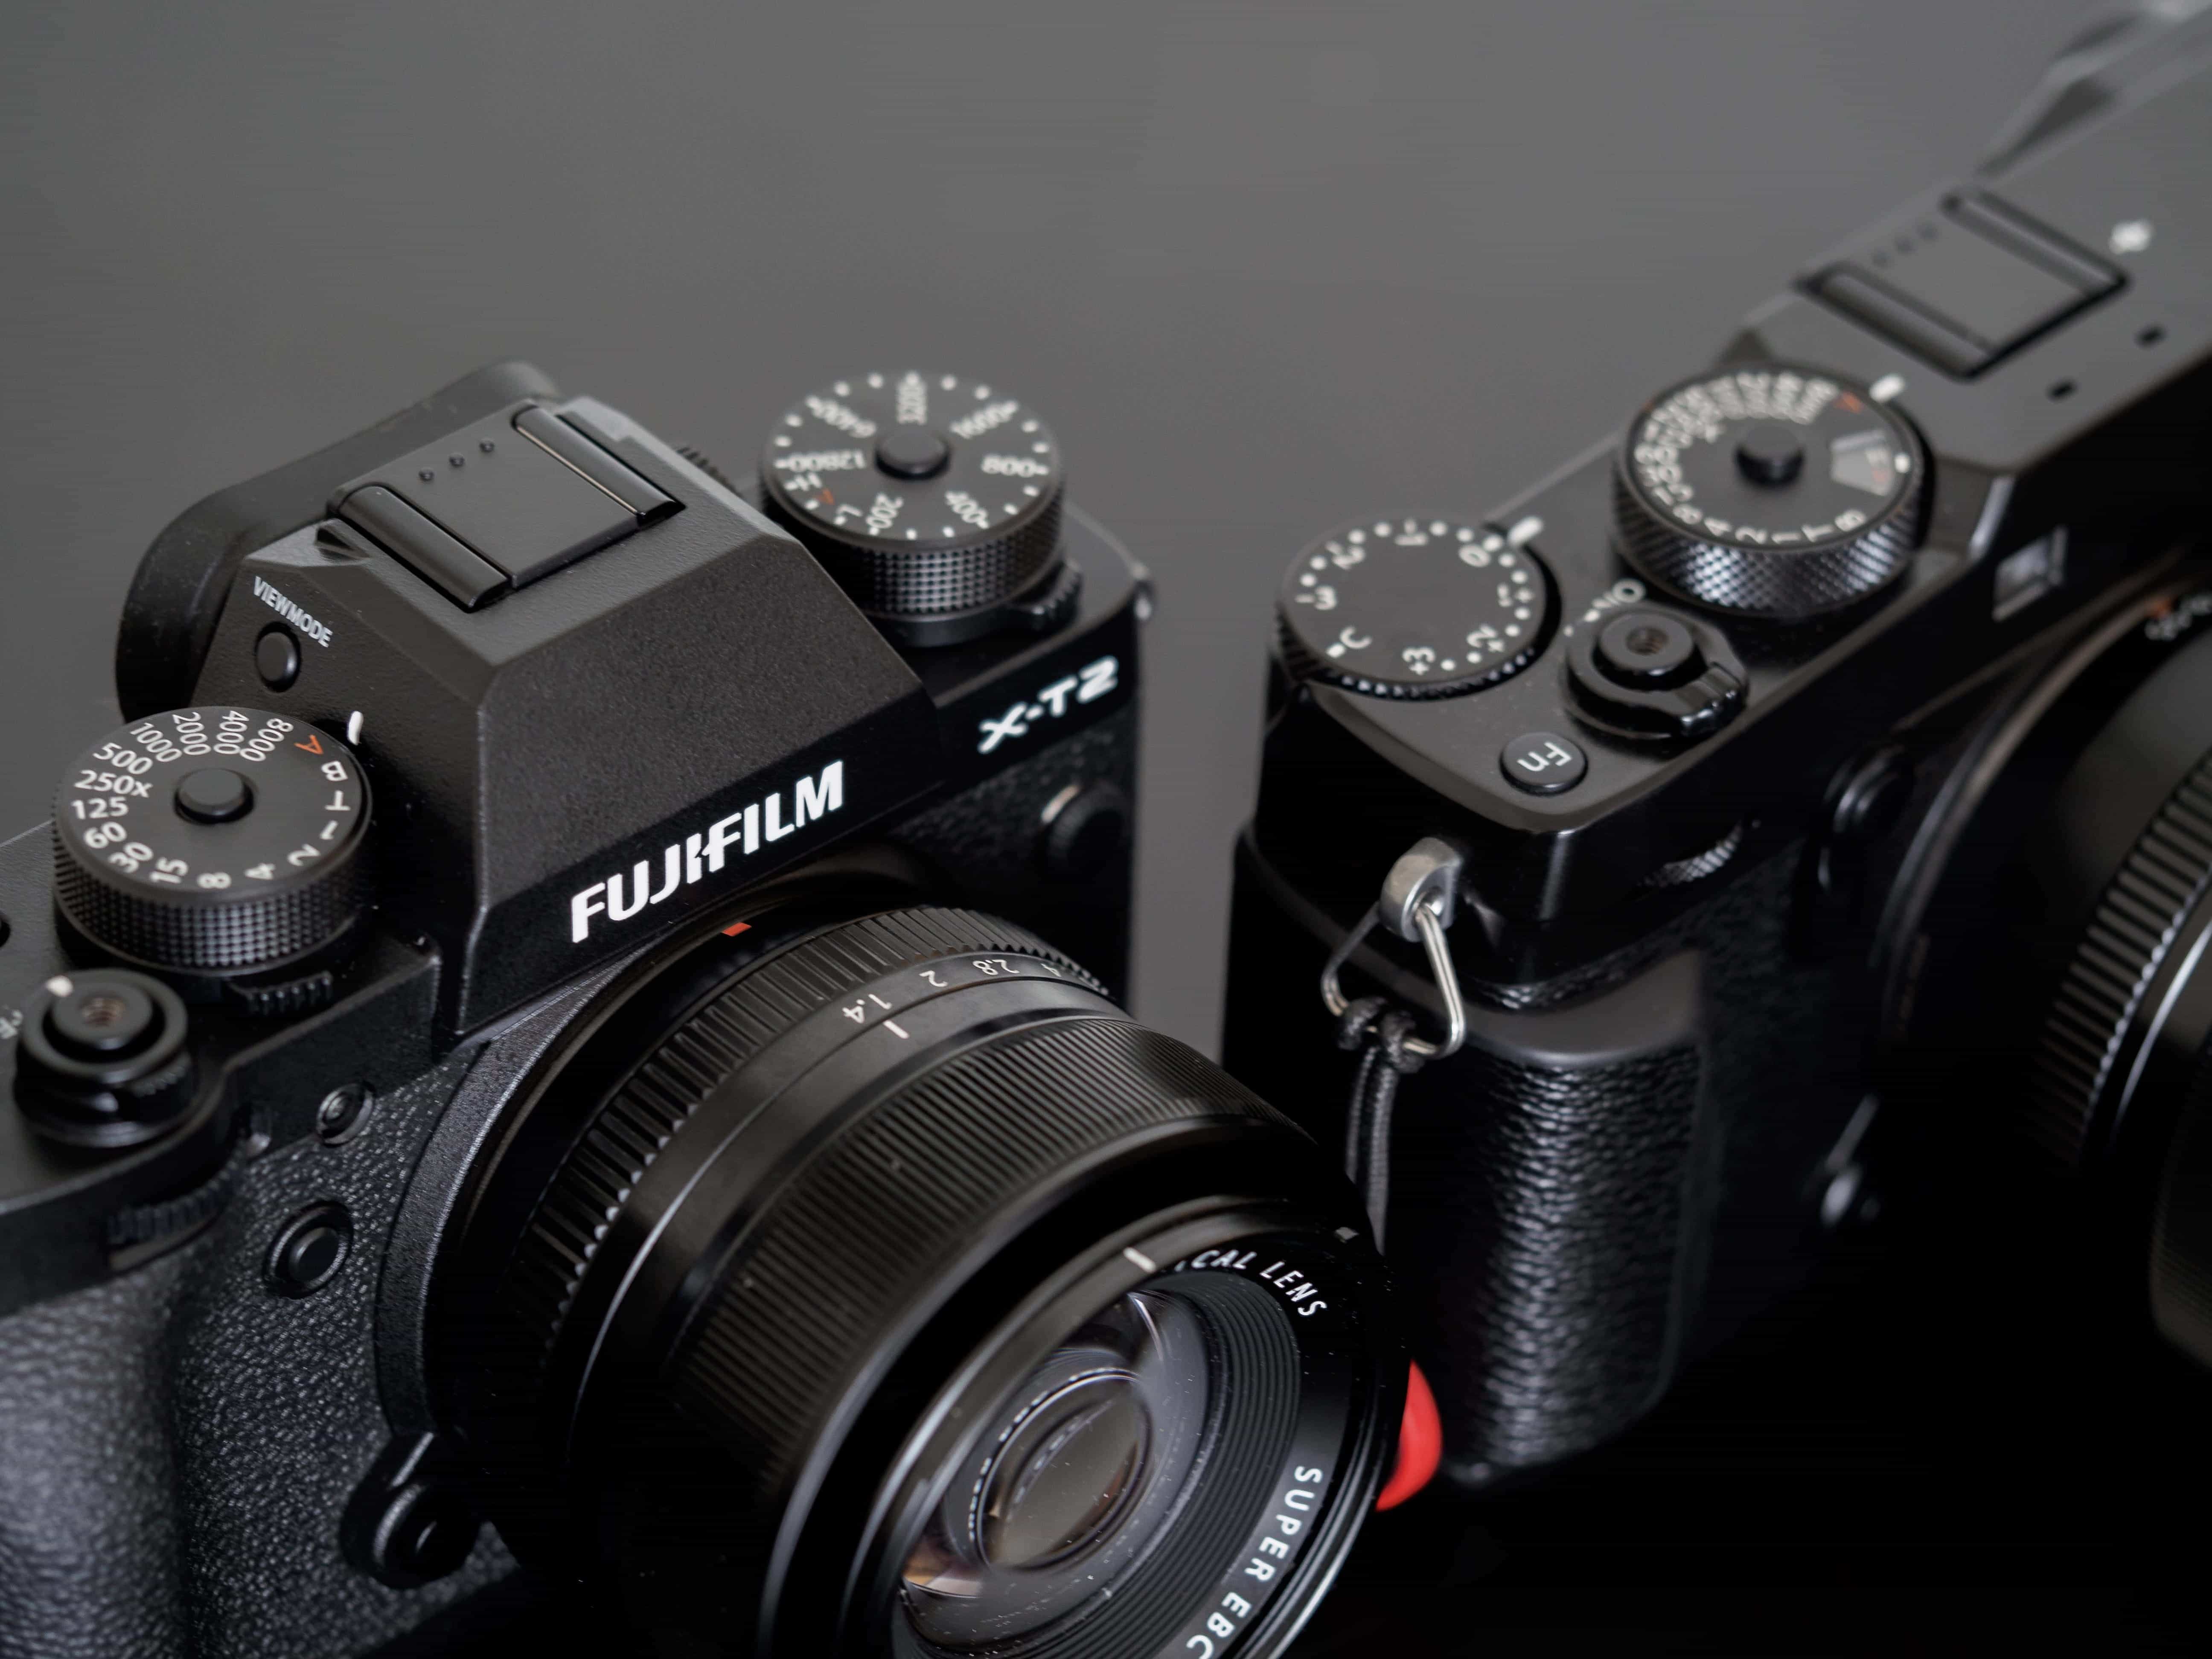 meel magneet klinker The Fujifilm X-T2 Review — Tools and Toys